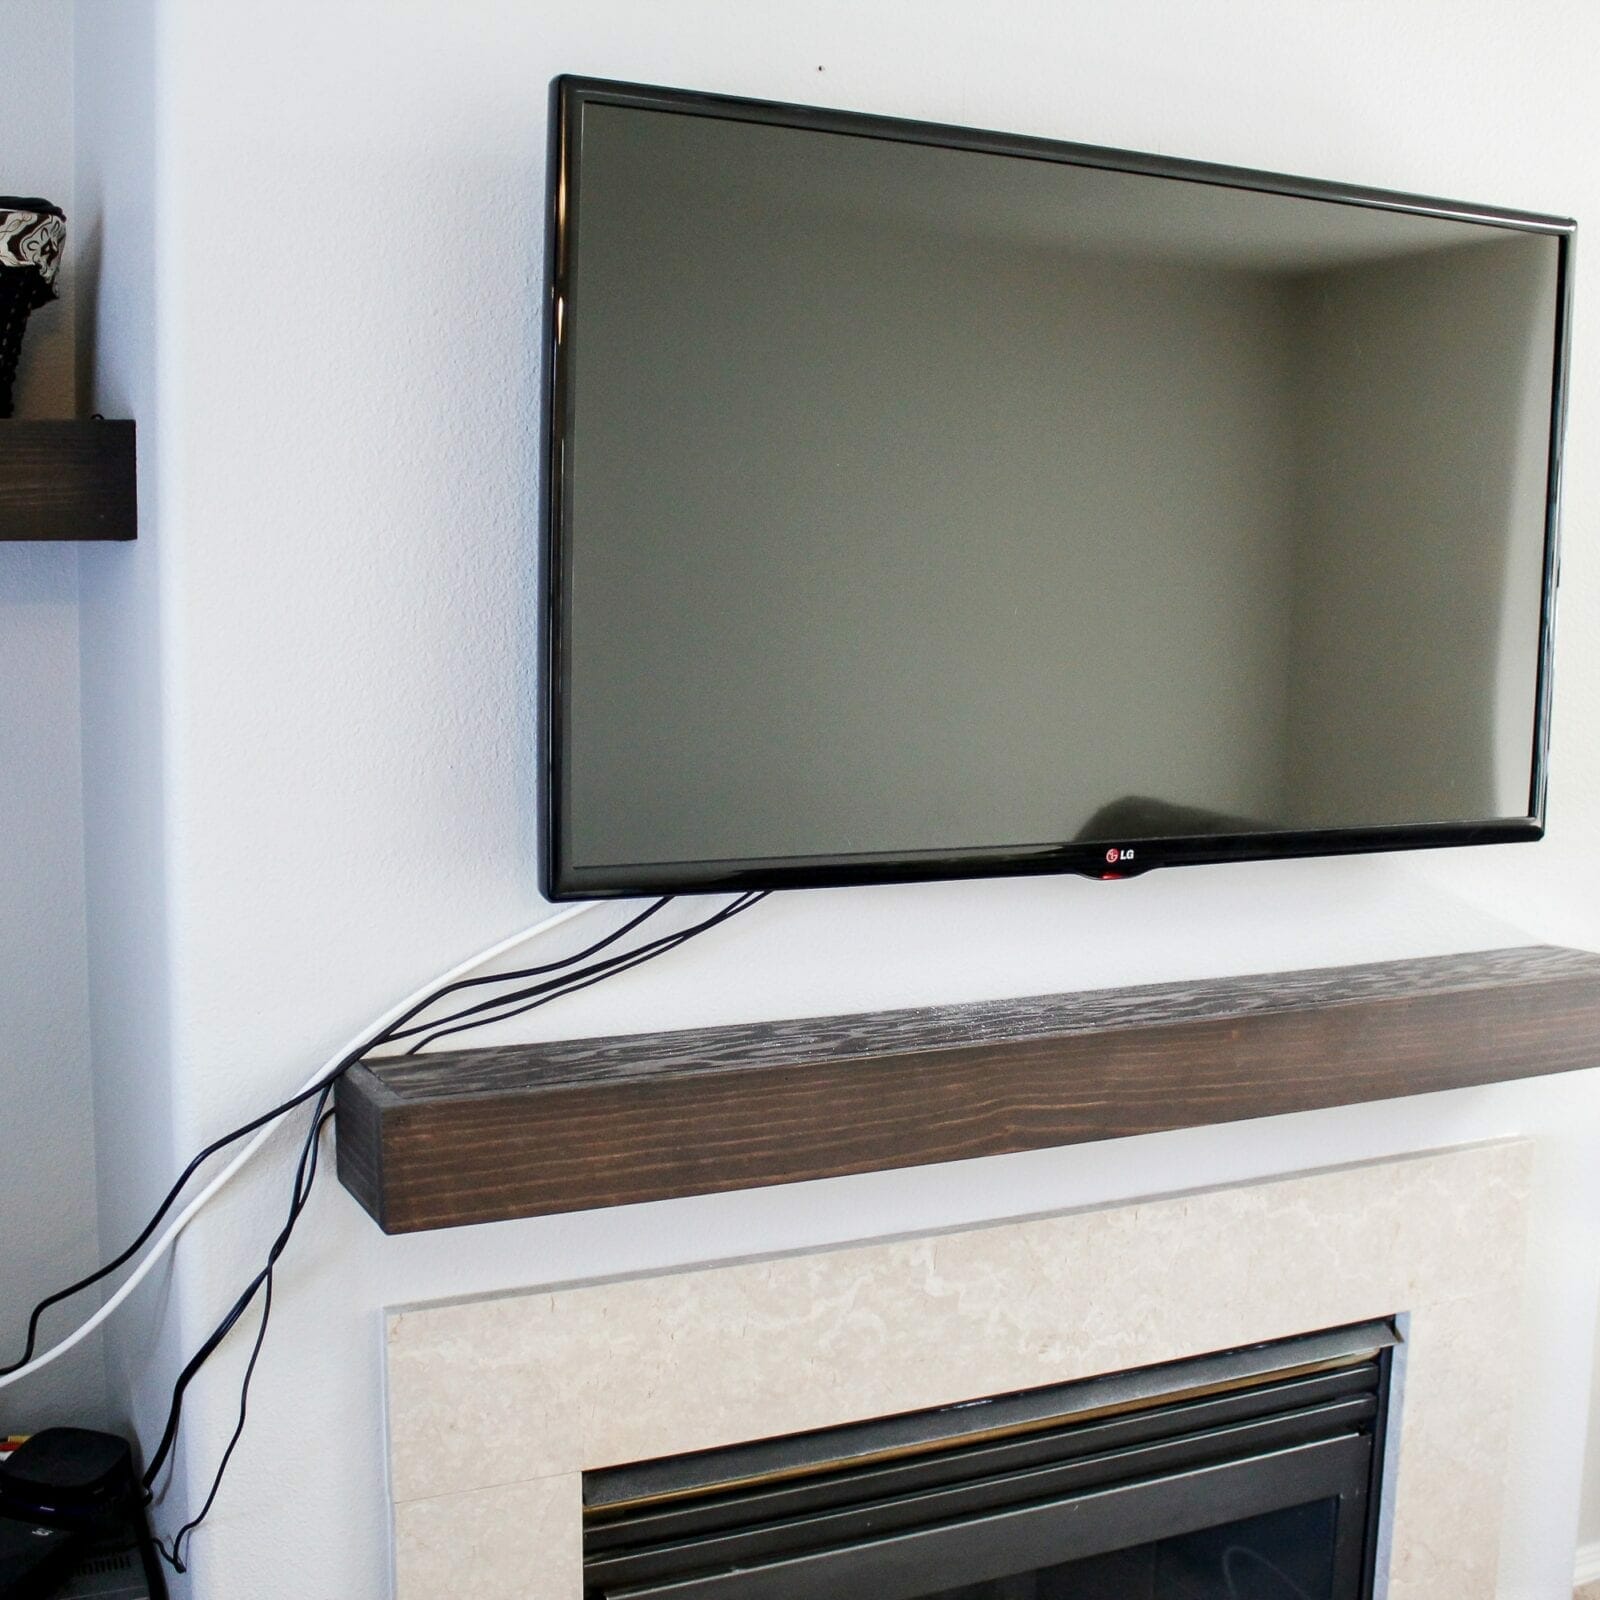 How To Hide Tv Cords Once And For All, How To Hang Tv Above Fireplace And Hide Wires